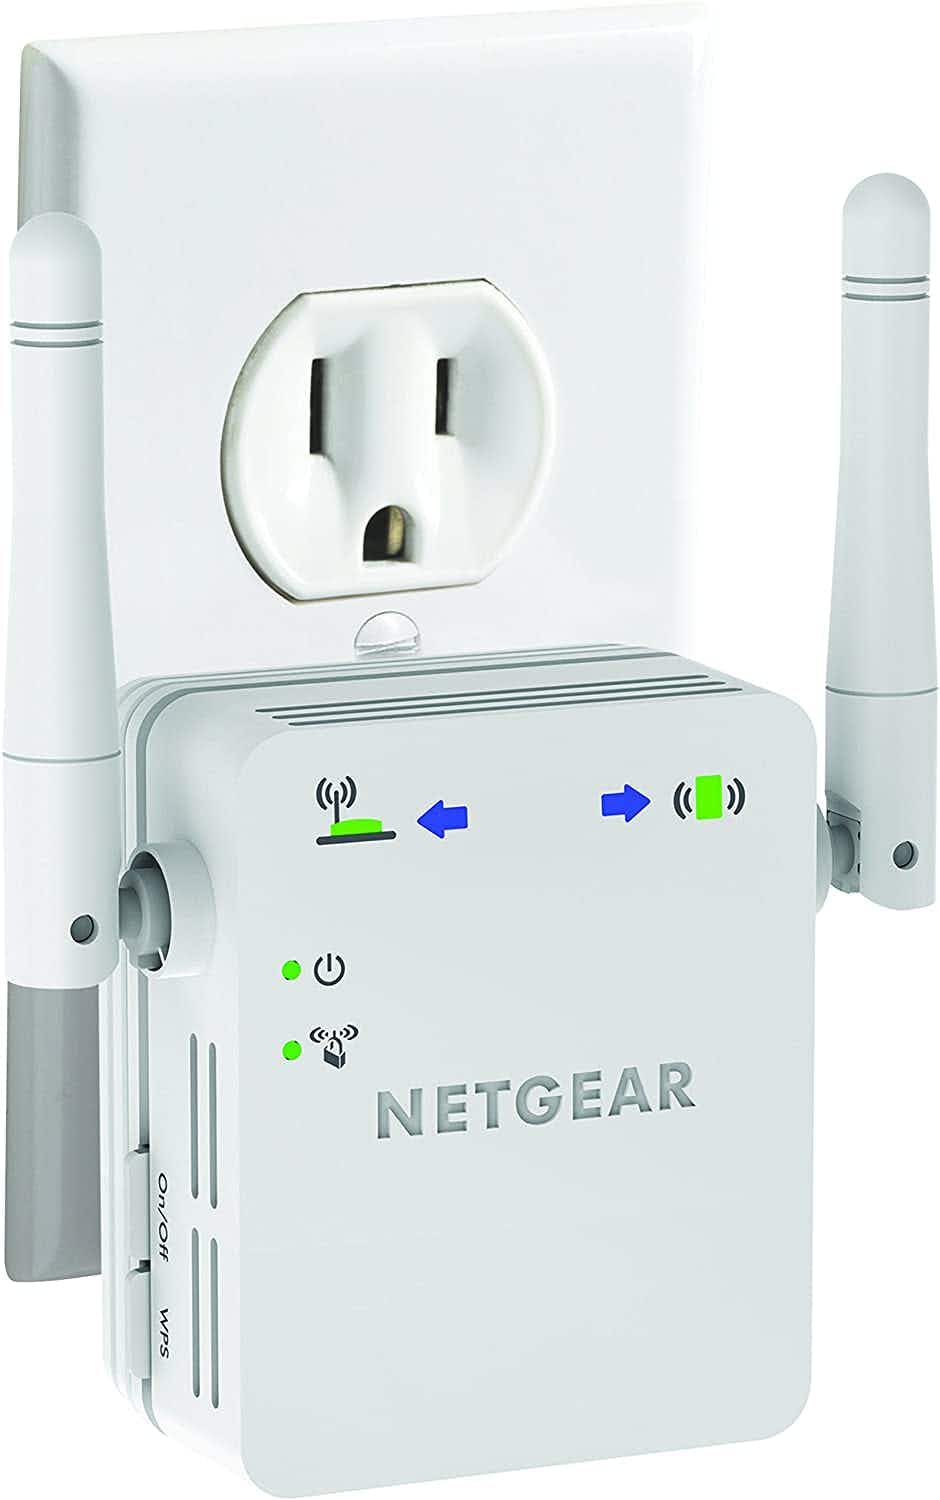 netgear wifi extender plugged in to an outlet